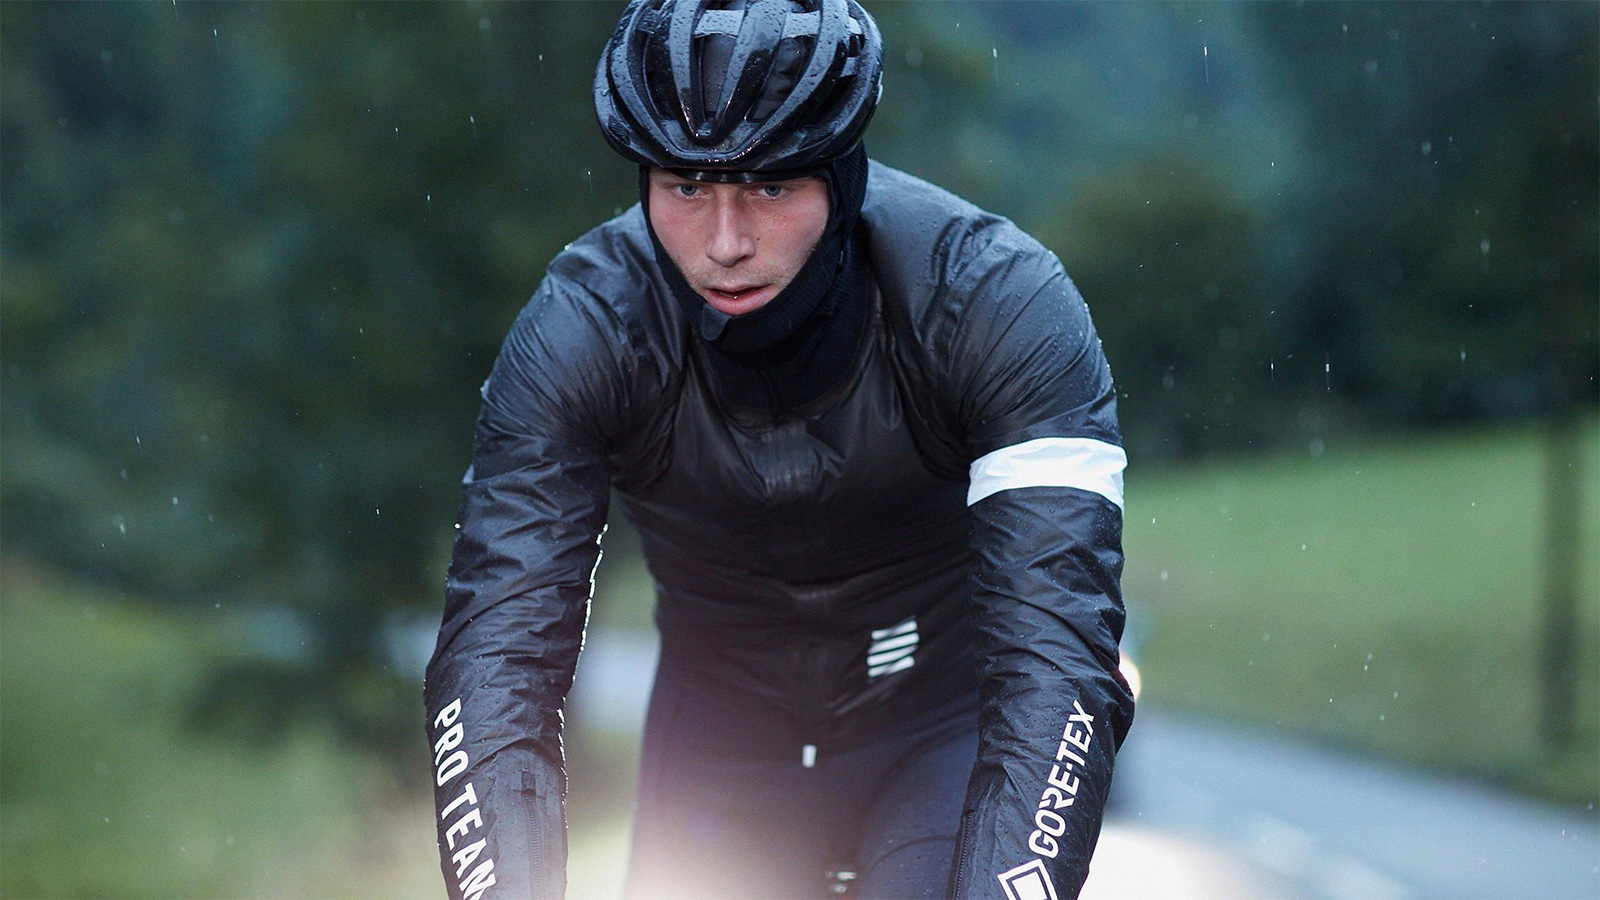 Rapha Pro Team Insulated Gore-Tex Jacket